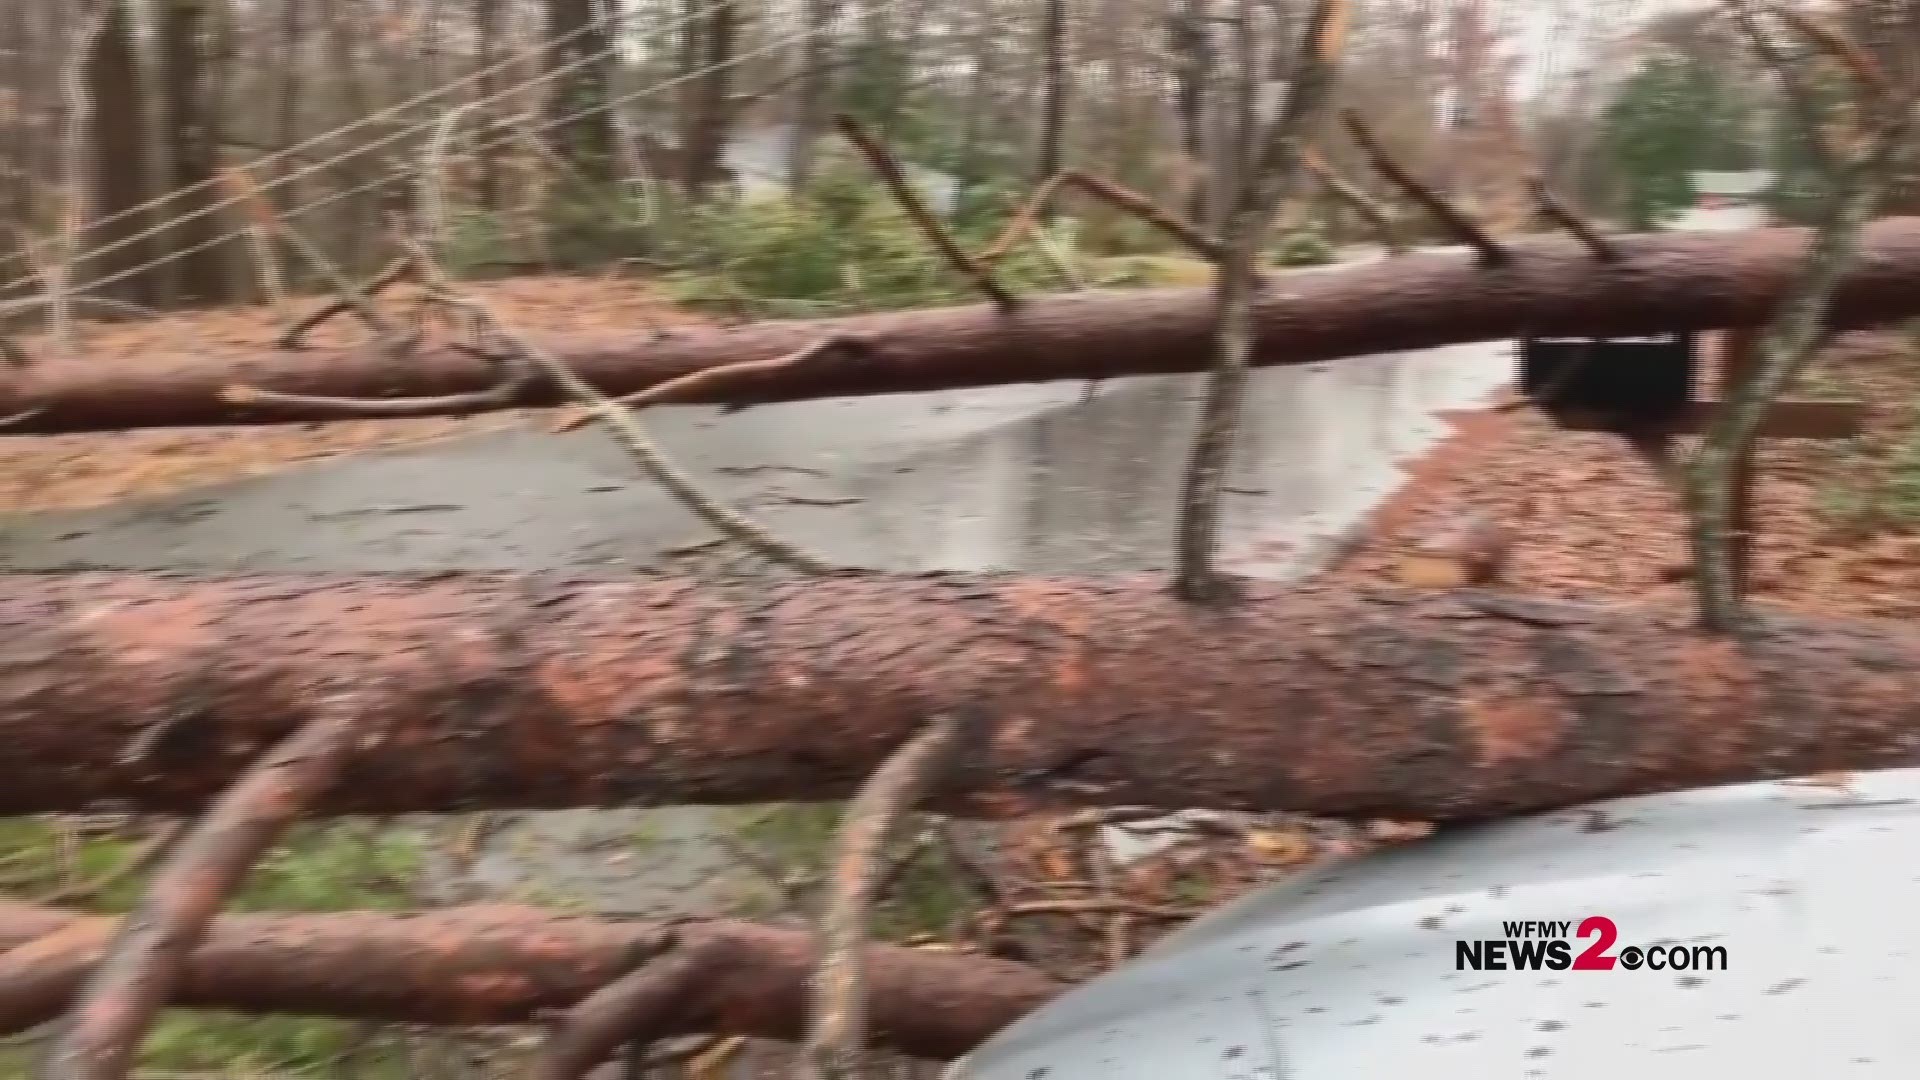 One family’s car and an entire neighborhood road blocked after several trees snap from the ice in Winston-Salem